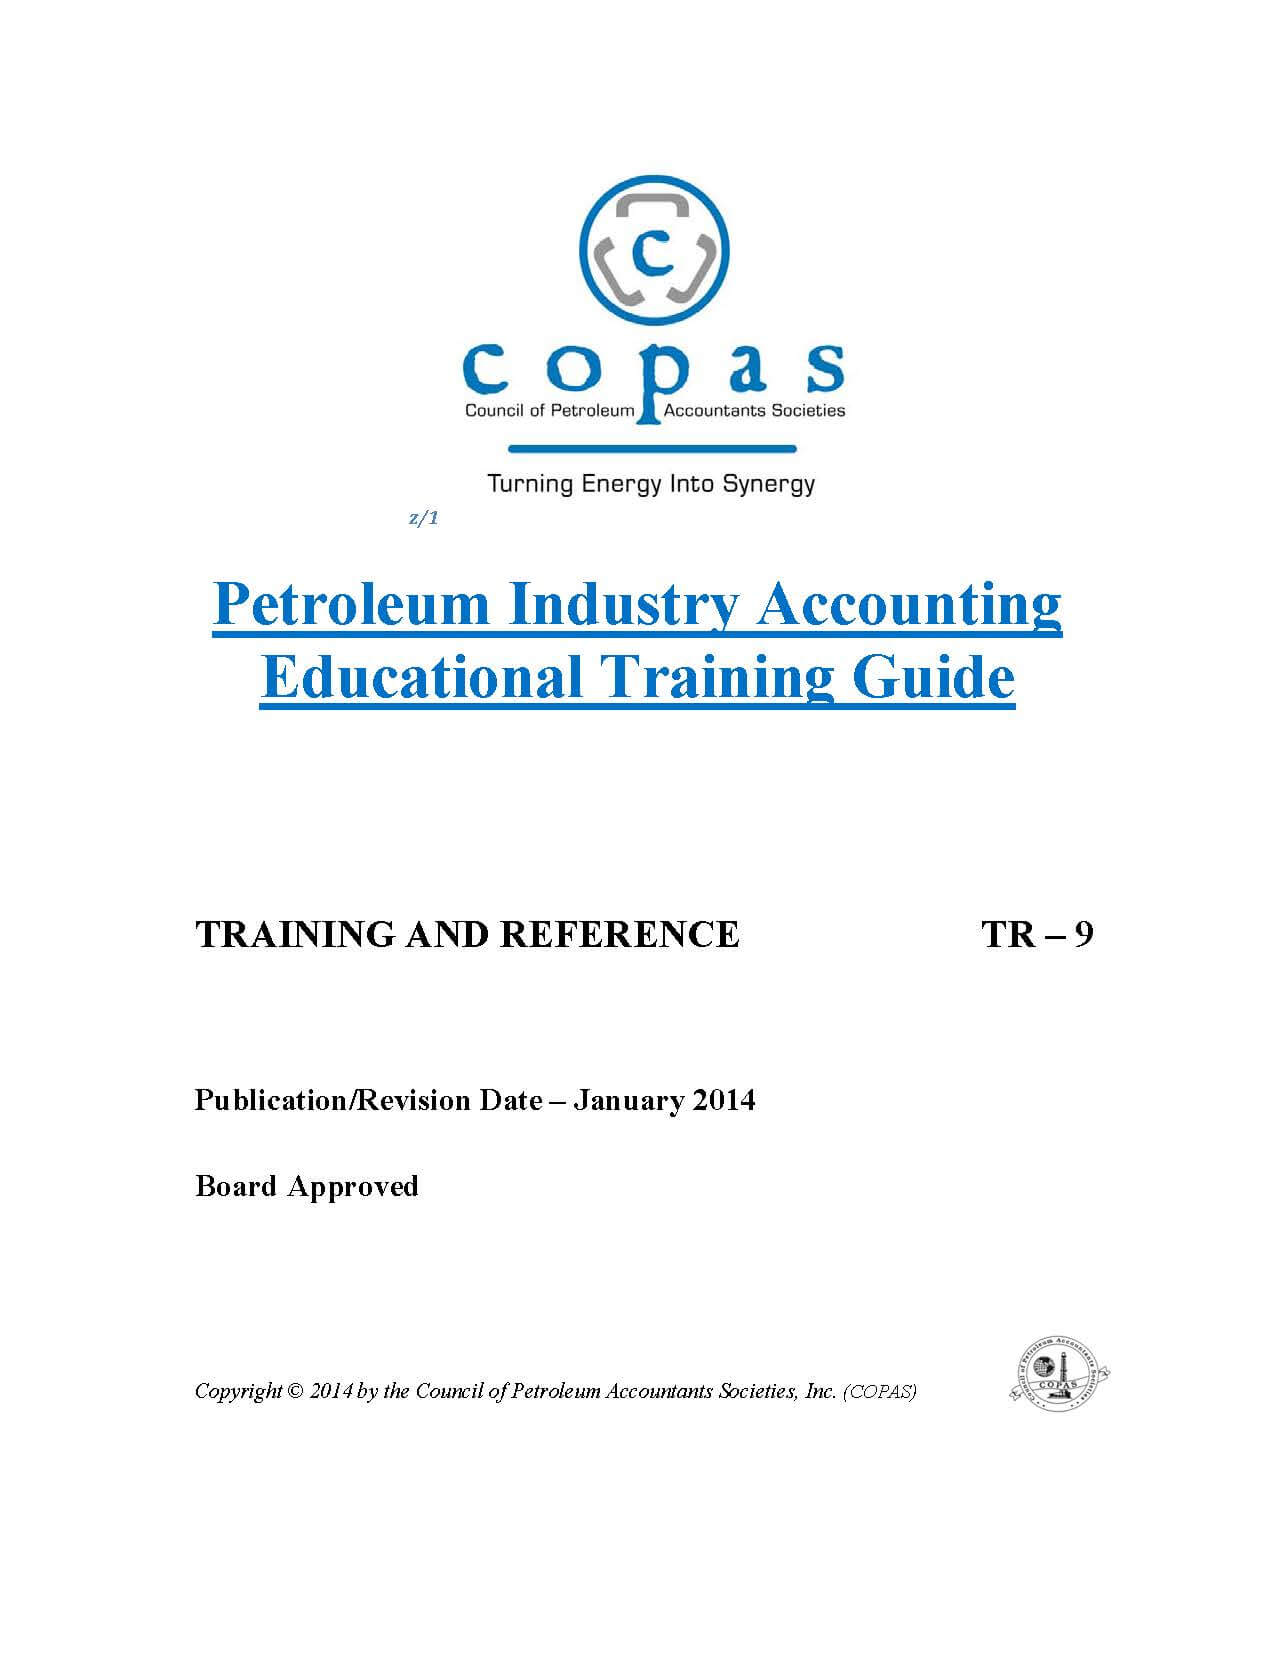 TR-9 Petroleum Industry Accounting Educational Training Guide - products TR 9 Educational Training Guide - Council of Petroleum Accountants Societies